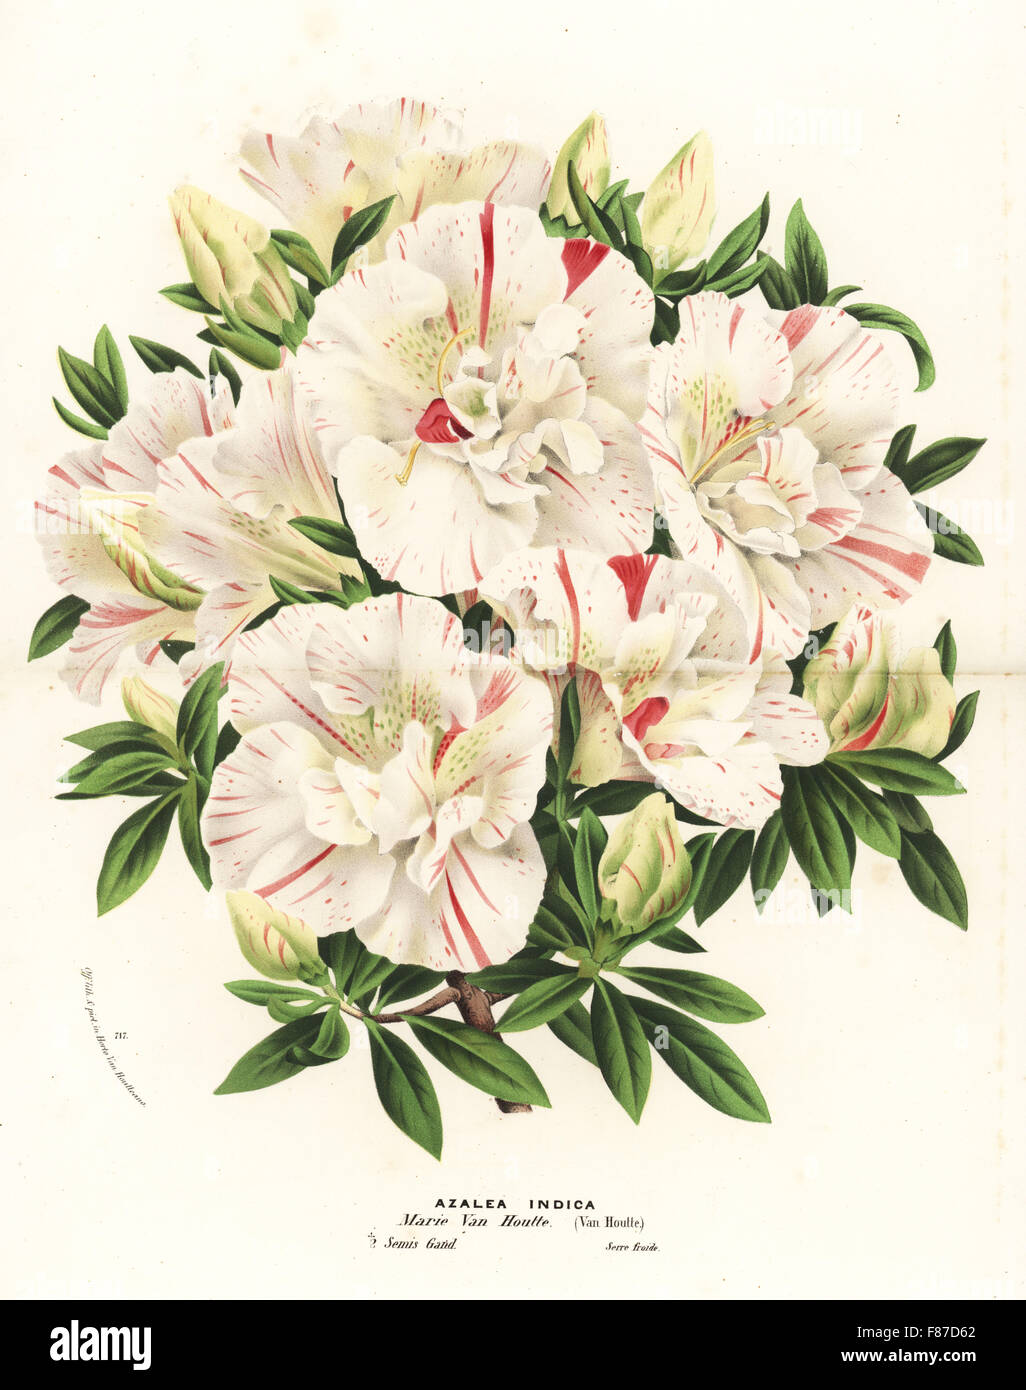 Azalea indica hybrid, Marie Van Houtte, Satsuki azalea, Rhododendron indicum. Handcoloured lithograph from Louis van Houtte and Charles Lemaire's Flowers of the Gardens and Hothouses of Europe, Flore des Serres et des Jardins de l'Europe, Ghent, Belgium, 1870. Stock Photo